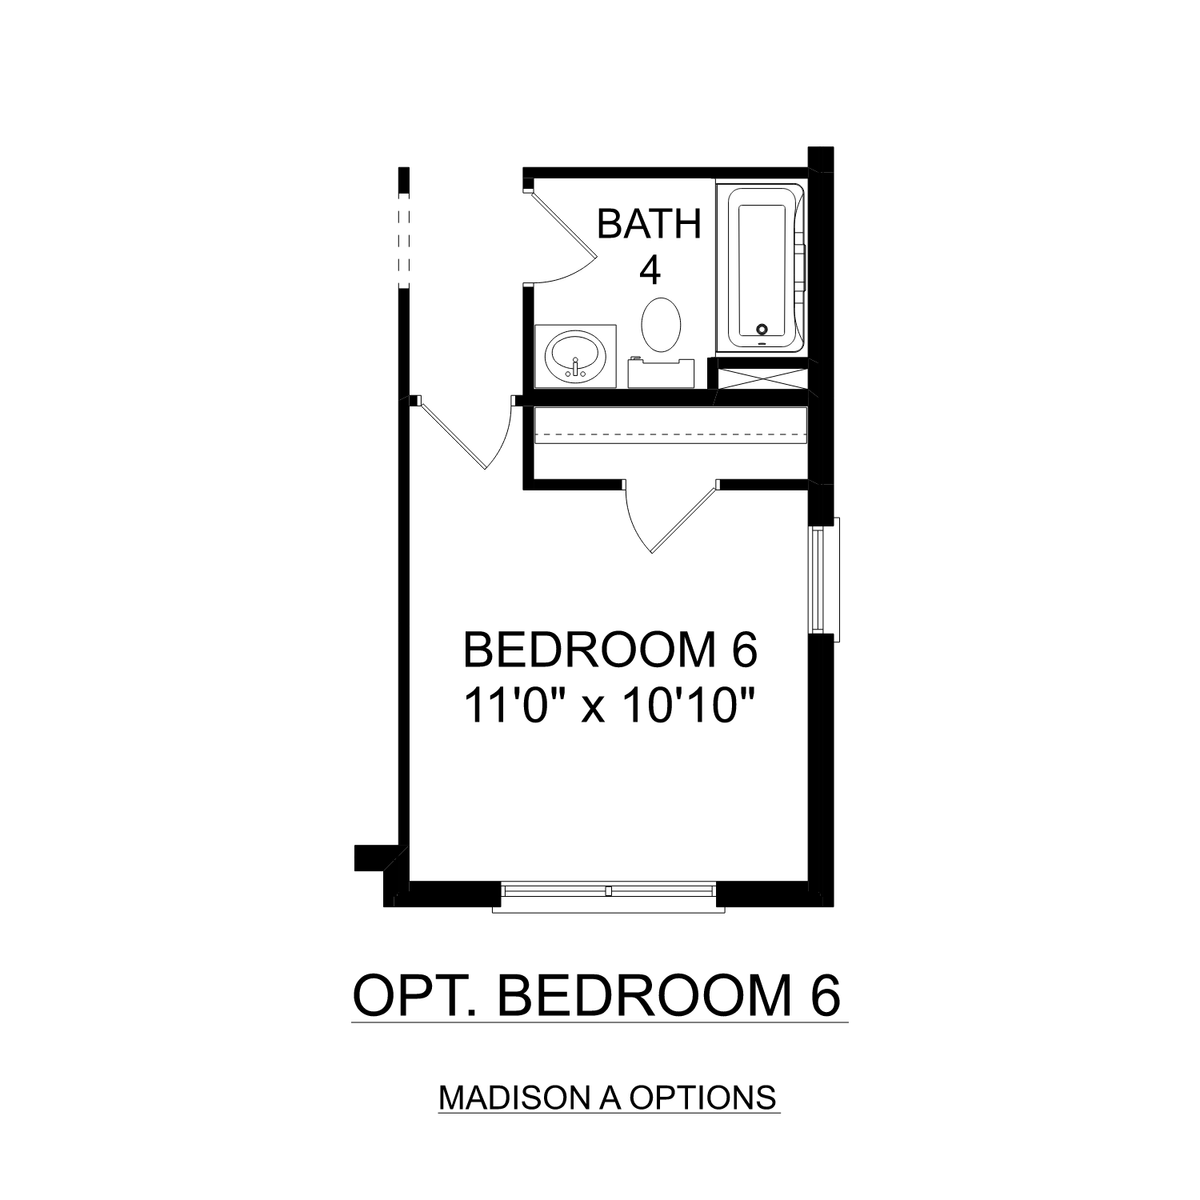 3 - The Madison A buildable floor plan layout in Davidson Homes' Kendall Downs community.